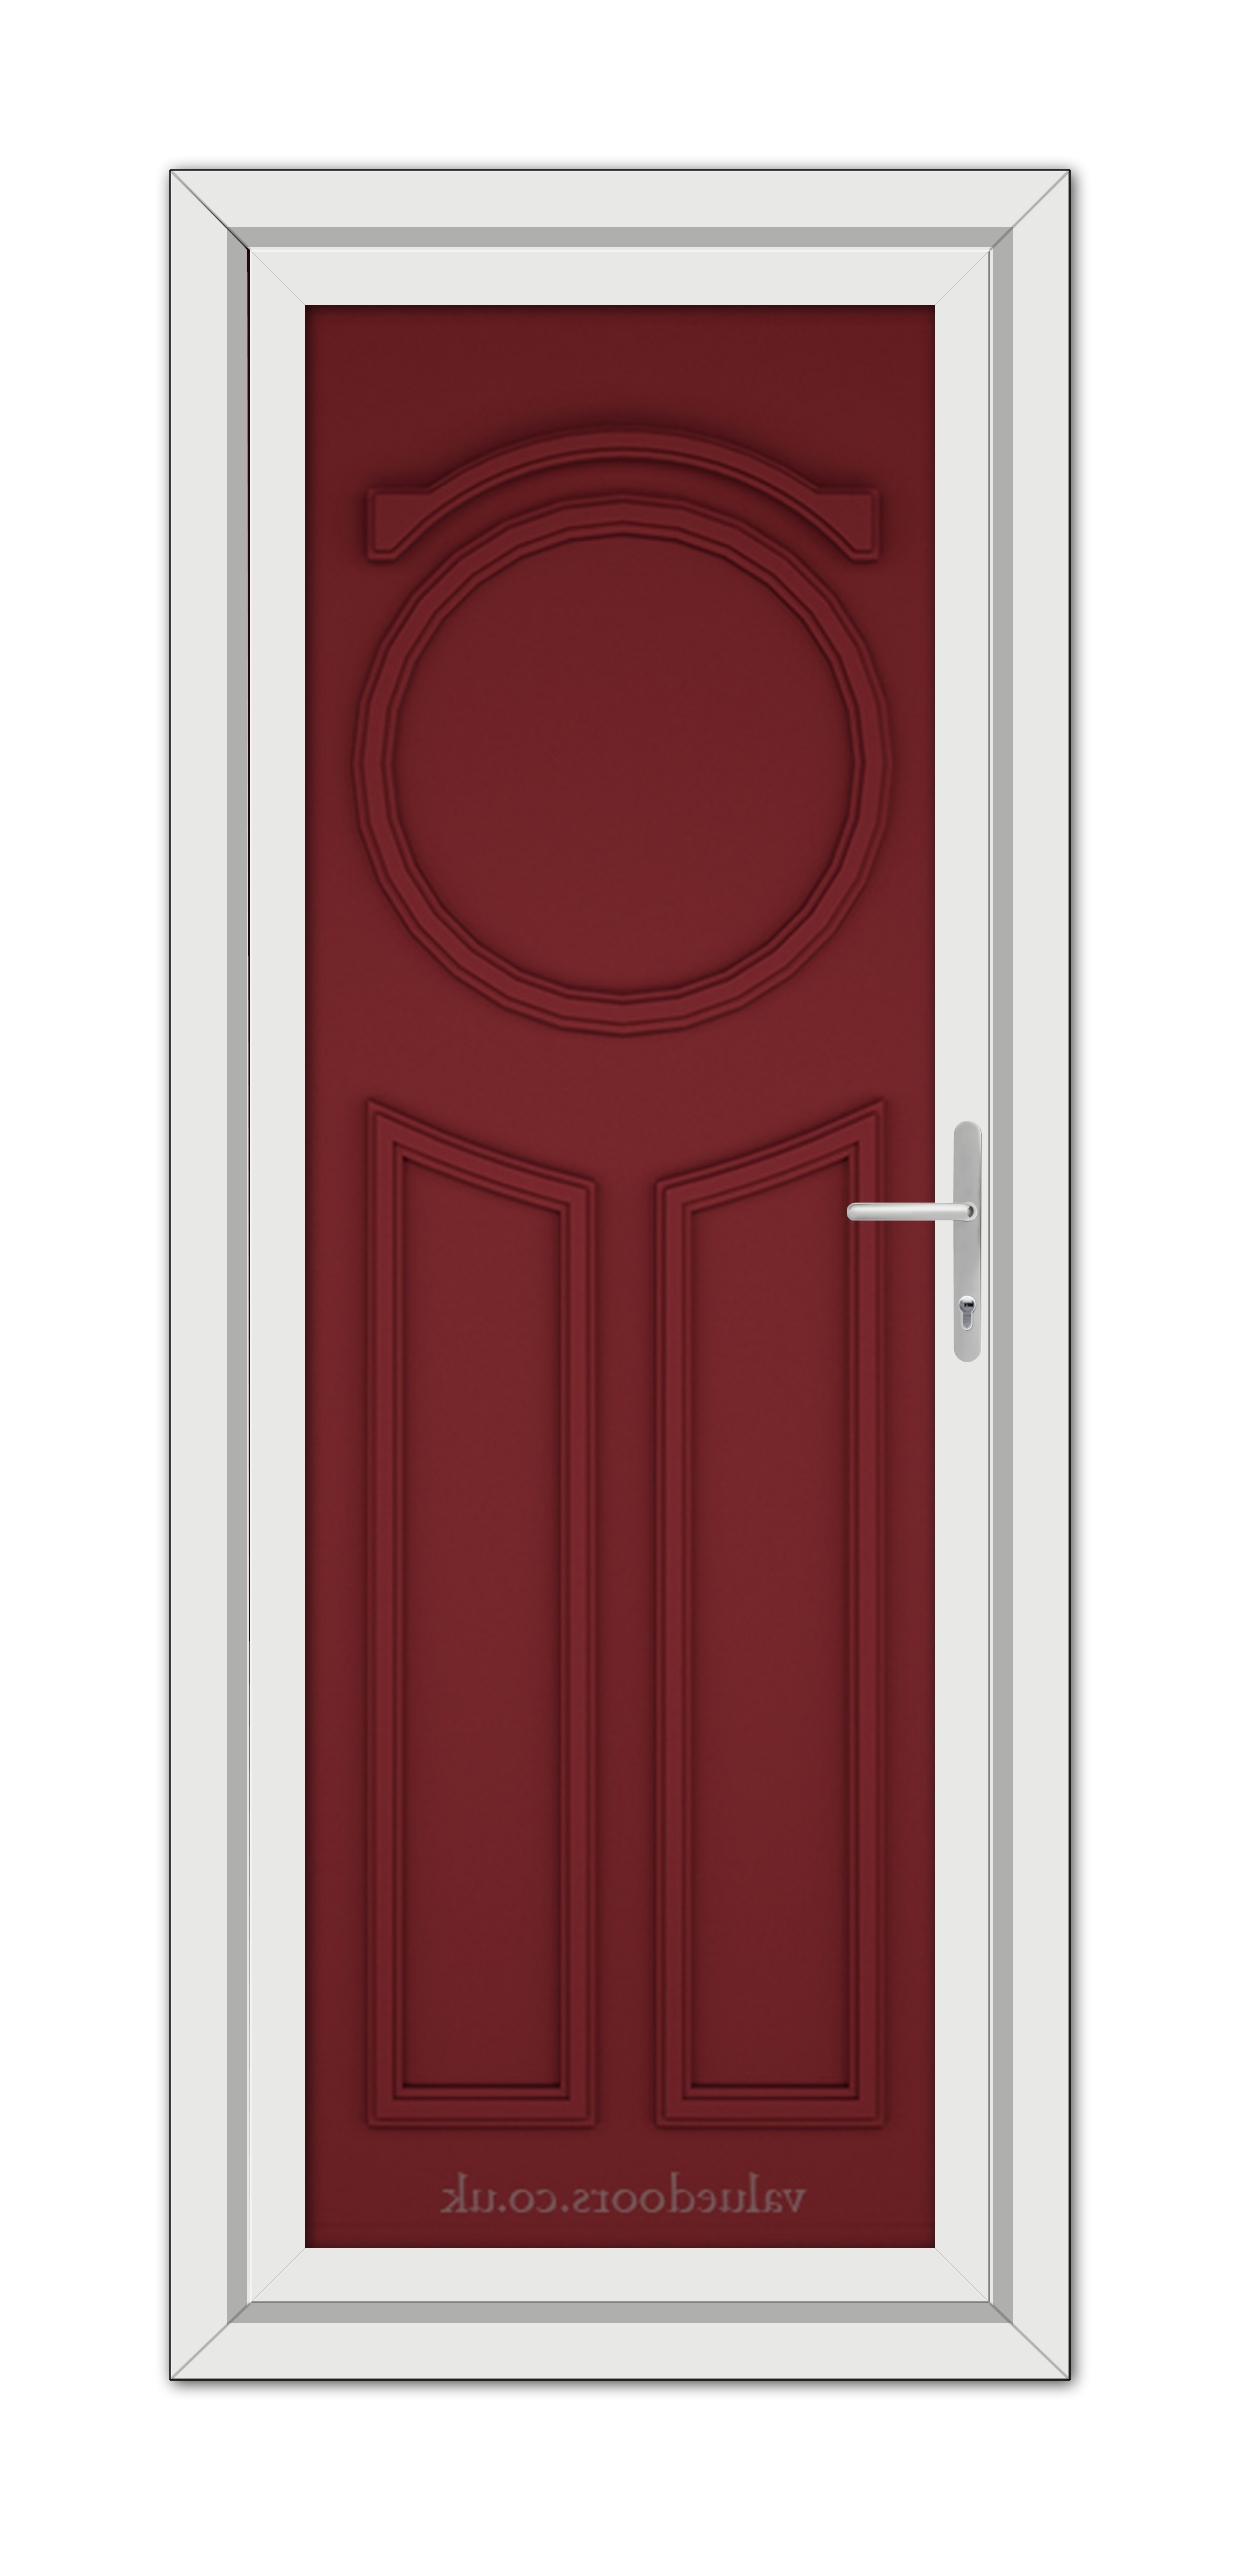 A vertical image of a Red Blenheim Solid uPVC Door with an oval window at the top and a metallic handle on the right, set within a white frame.